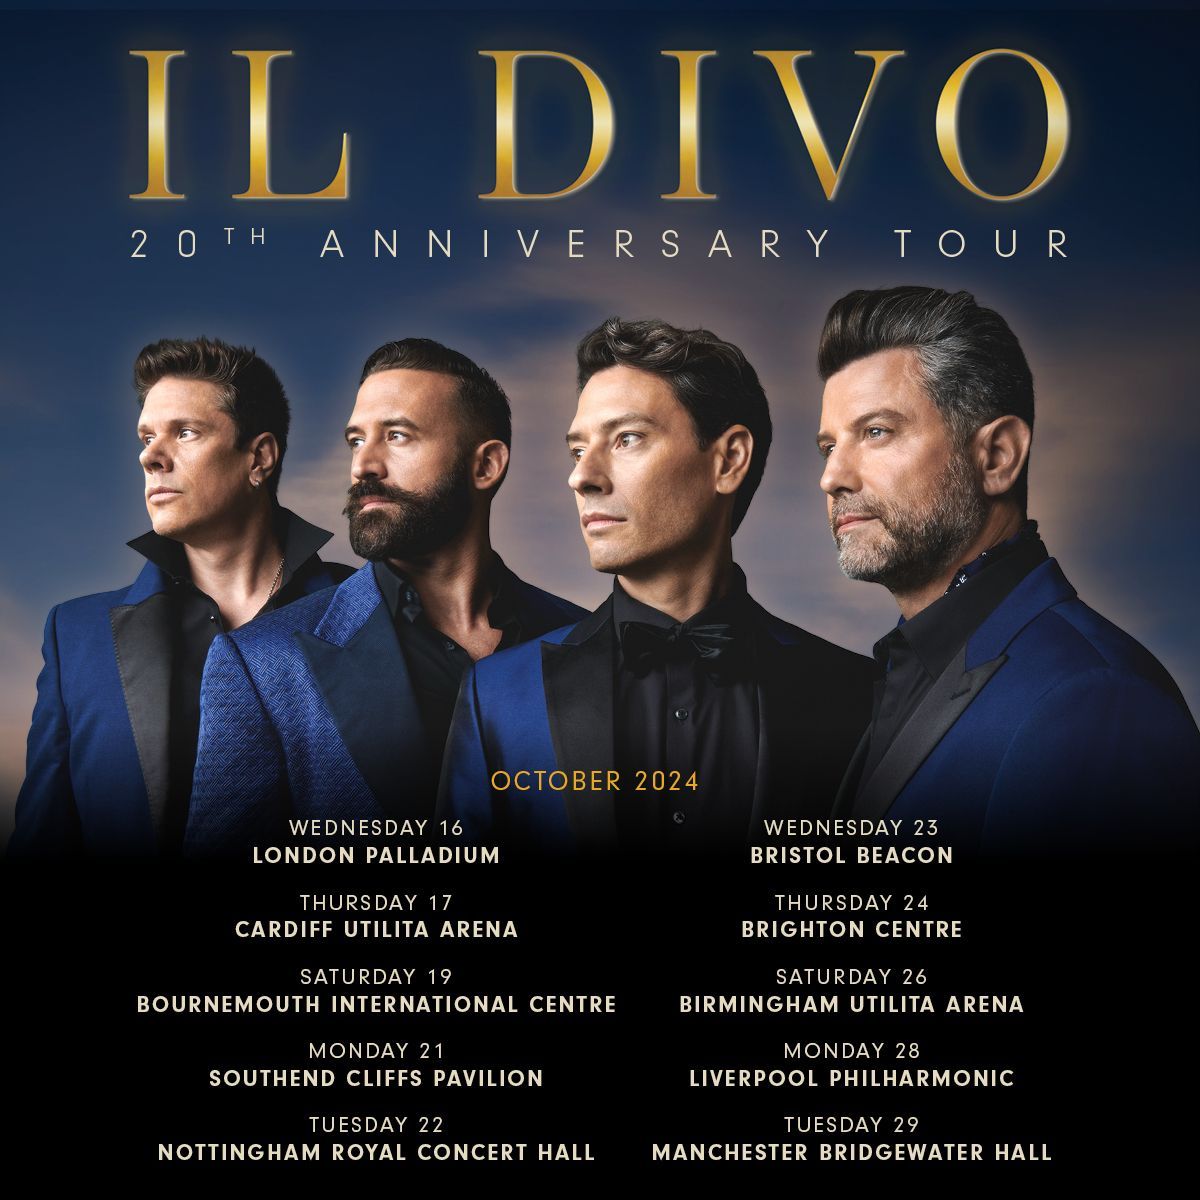 LISTEN: Il Divo star Urs Bühler reveals visual spectacular plans for 20th anniversary tour at @RoyalNottingham Concert Hall Oct 22. Tickets on sale Fri, April 19, 9.30am at tix.to/IlDivo2024 Full @GW1962 chat & story chad.co.uk/whats-on/liste… @ildivoofficial @SJMConcerts #ad